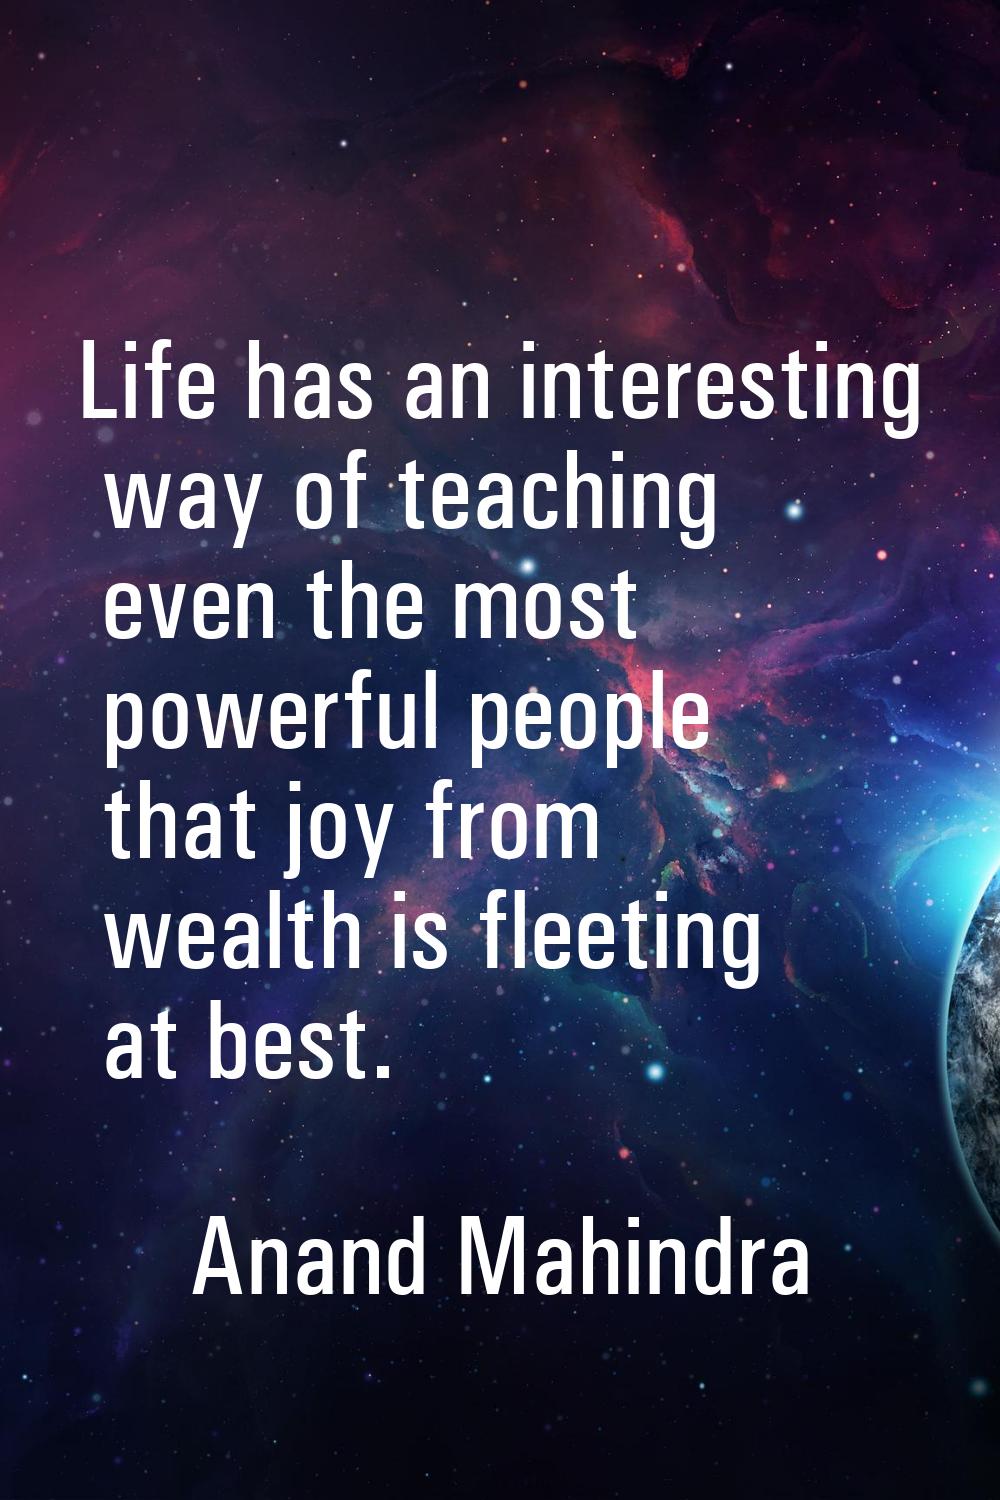 Life has an interesting way of teaching even the most powerful people that joy from wealth is fleet